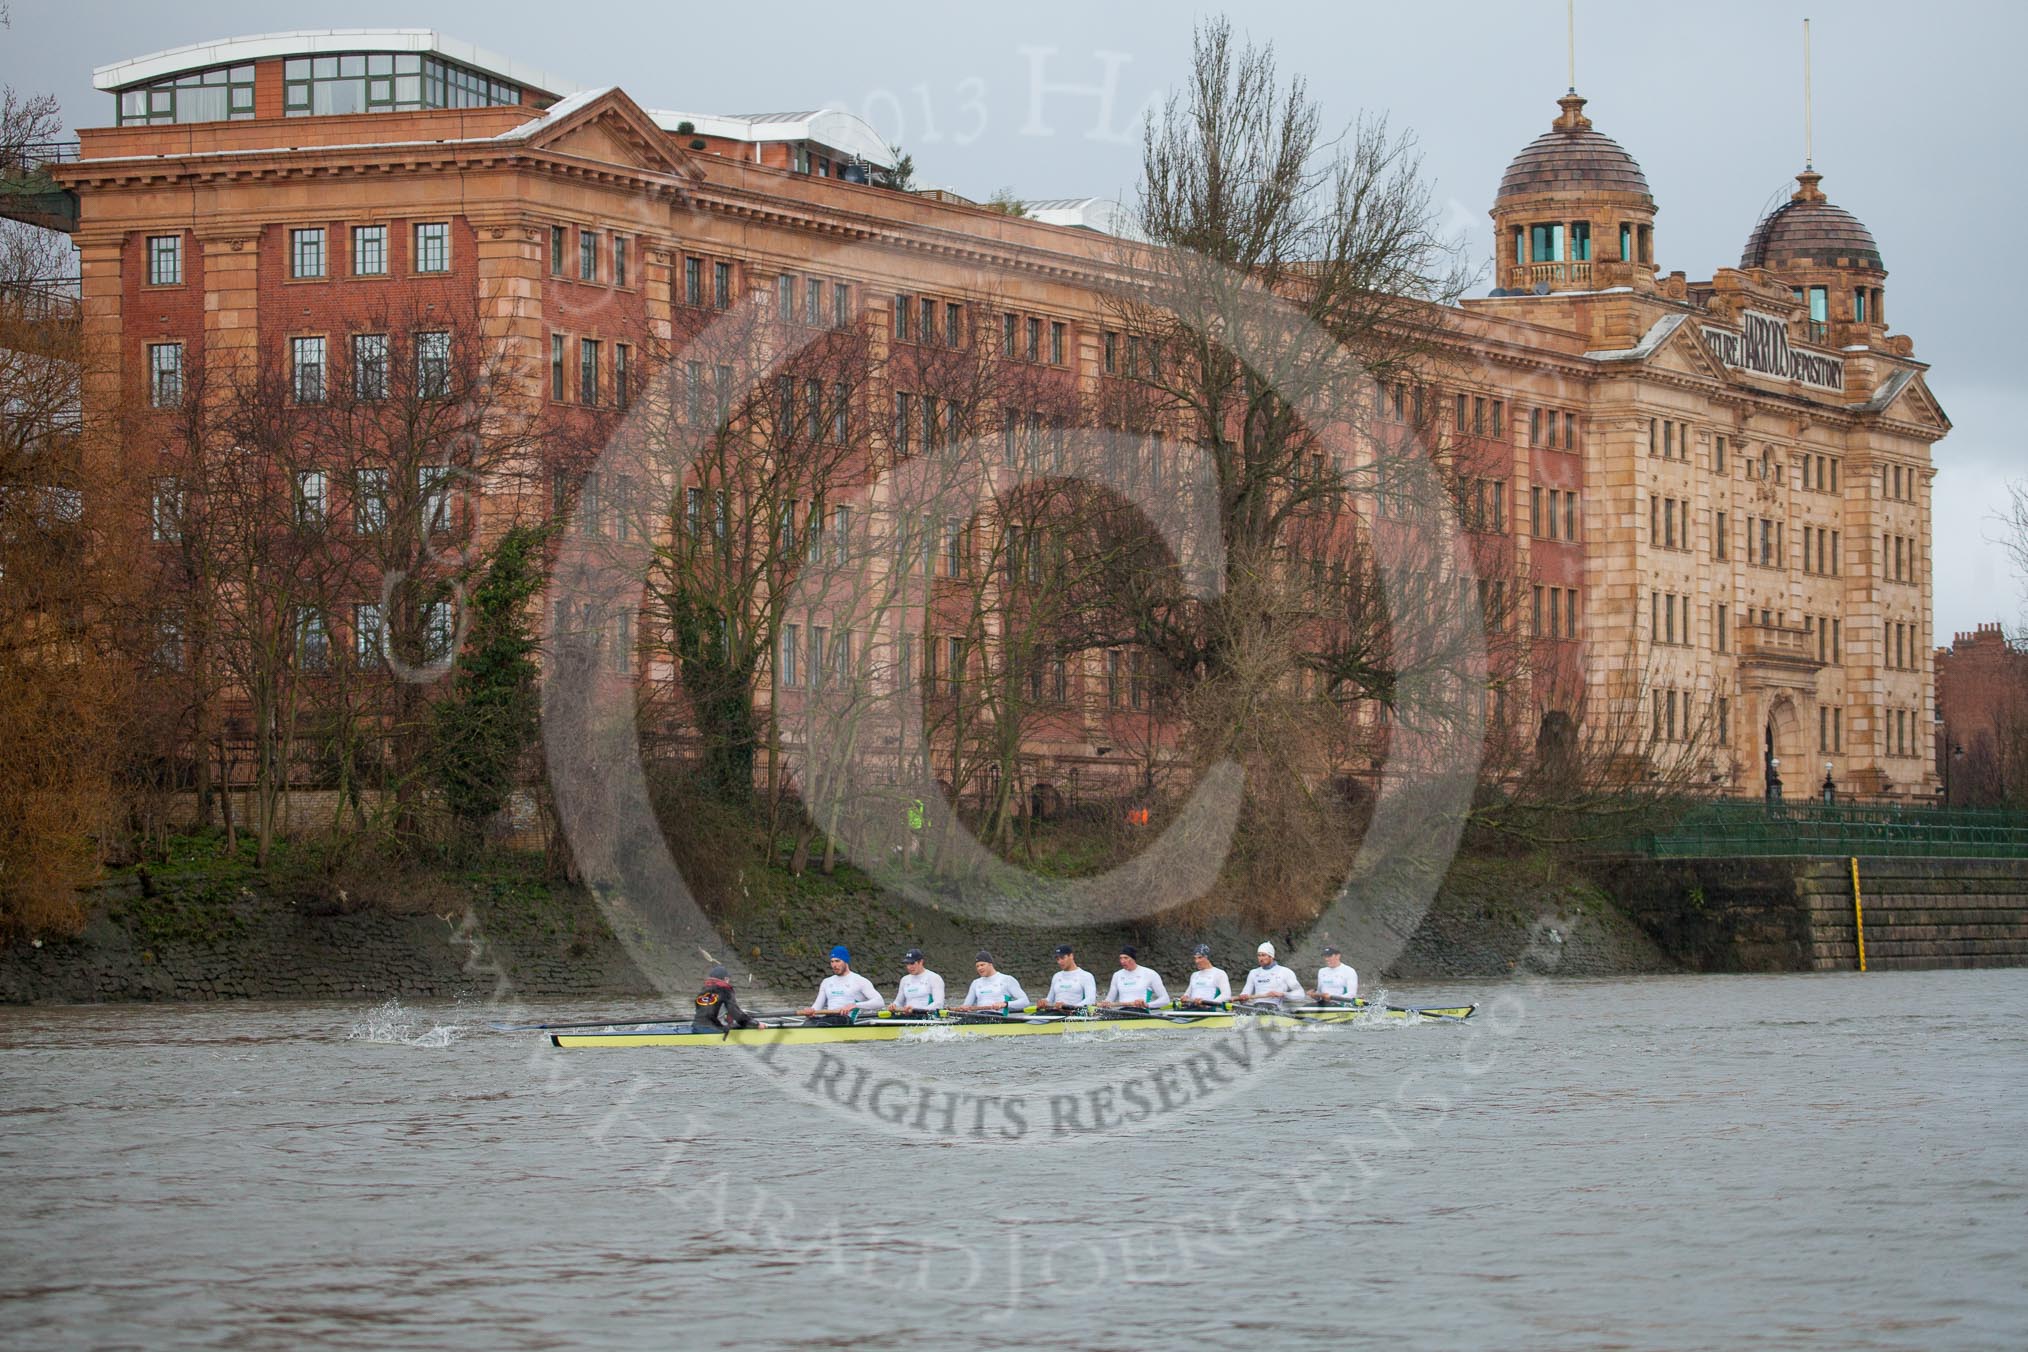 The Boat Race season 2013 - fixture OUBC vs German Eight.
River Thames,
London SW15,

United Kingdom,
on 17 March 2013 at 15:06, image #85